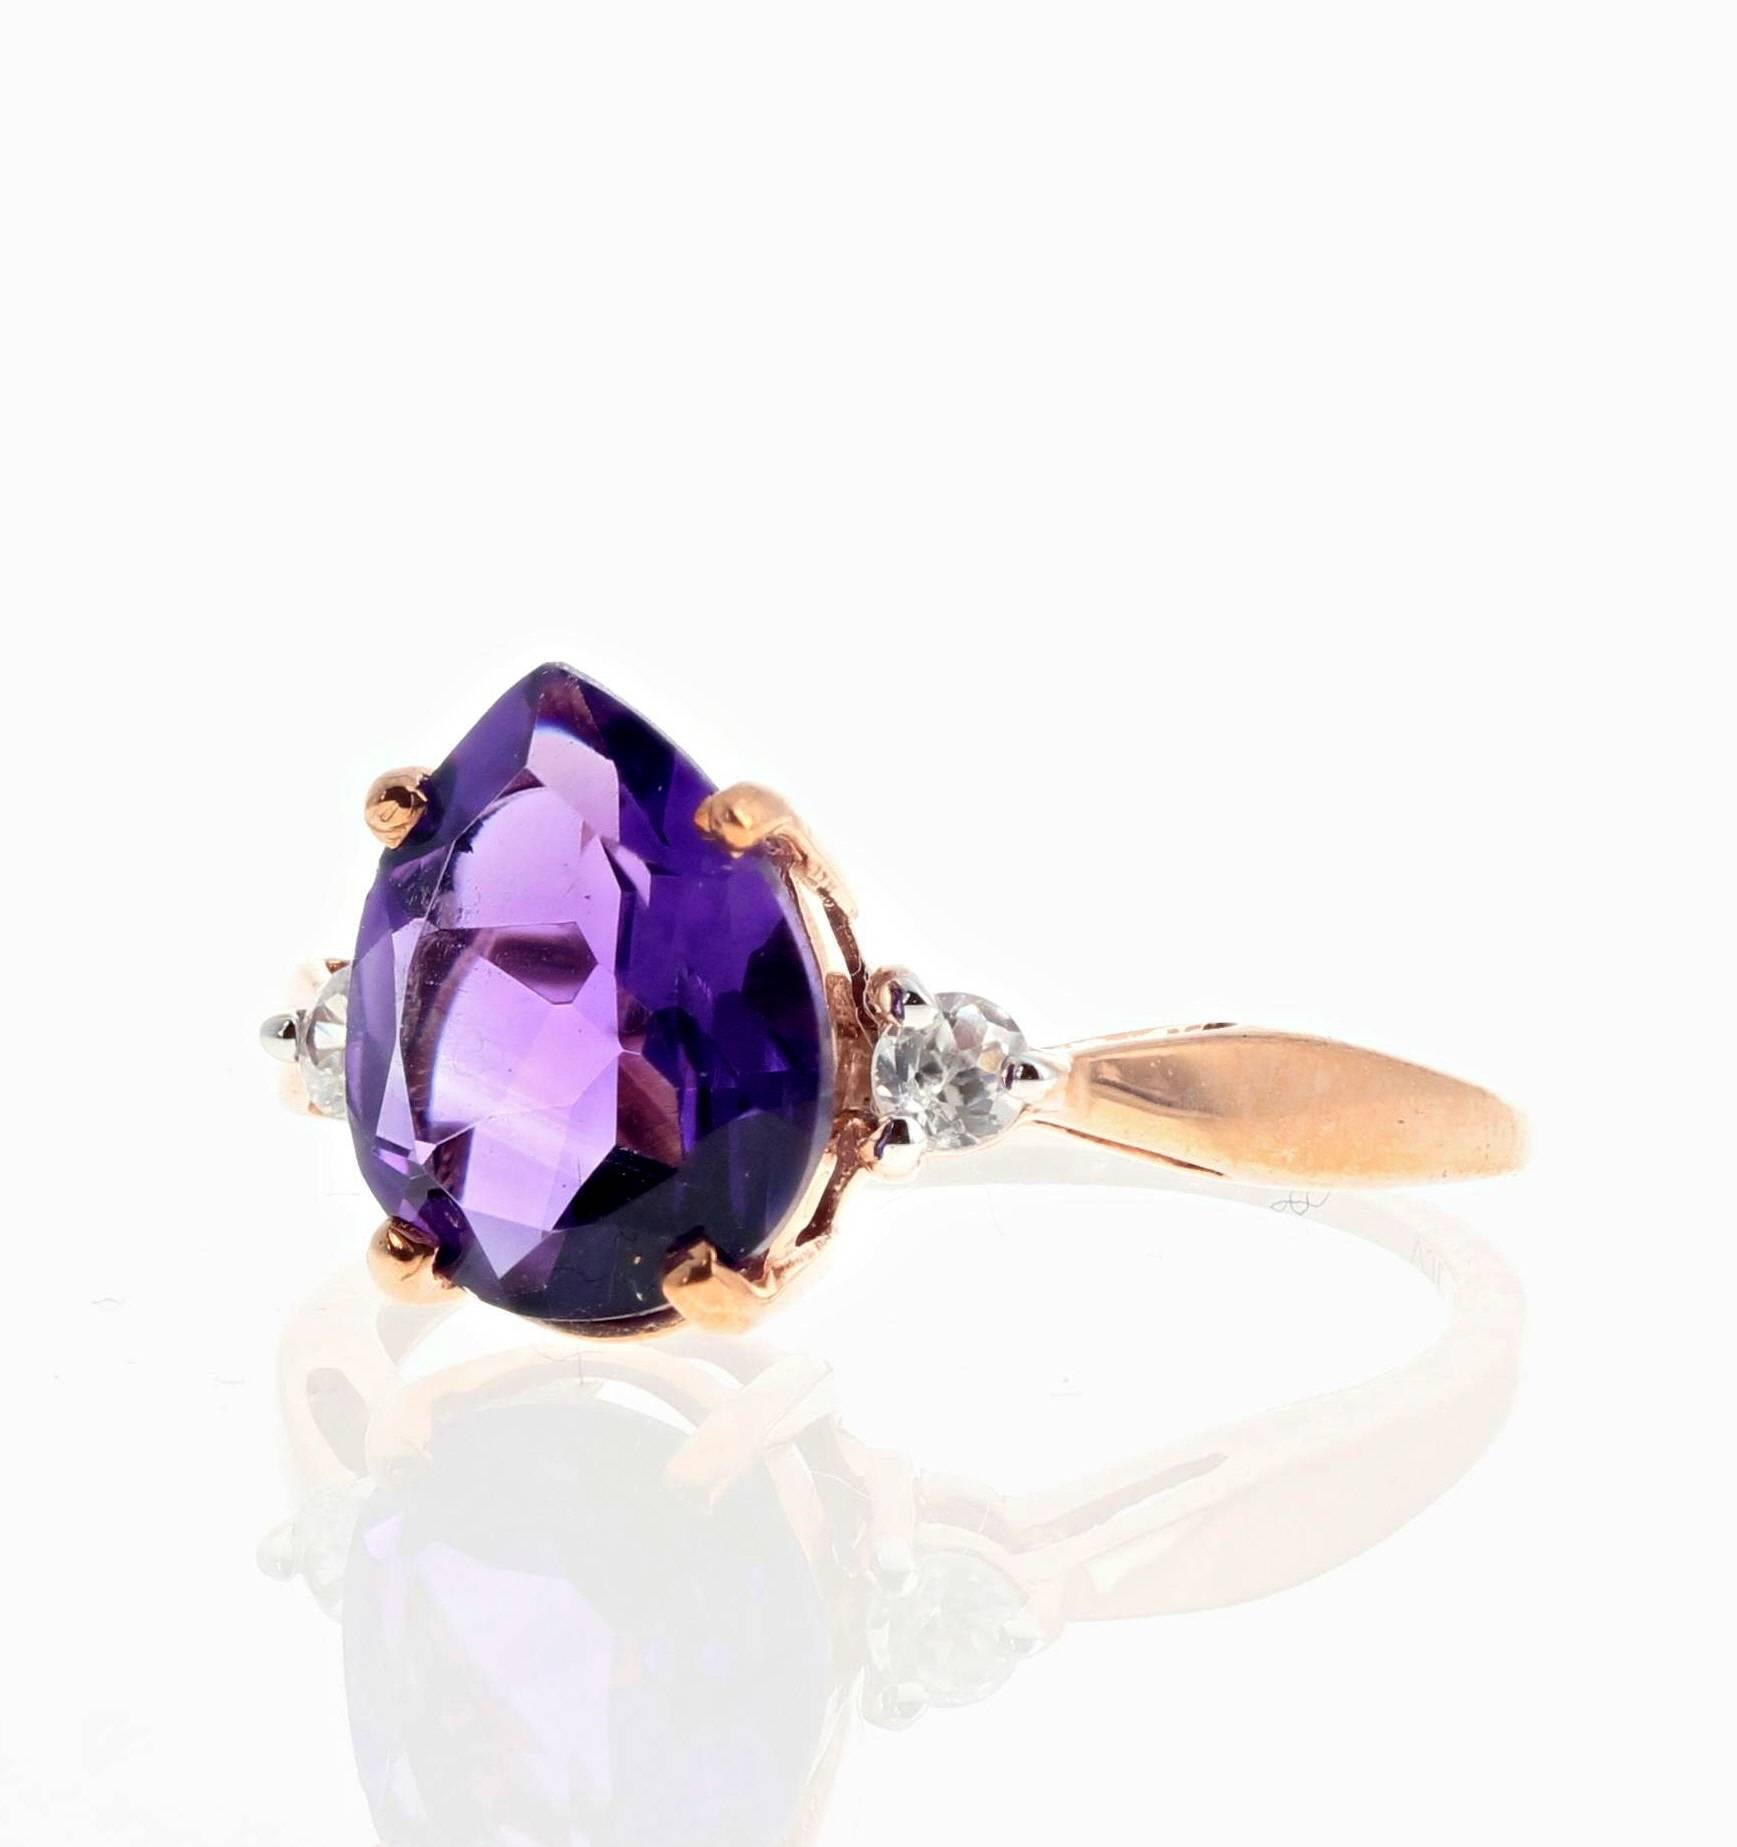 Brilliant purple pear cut 1.6 carat Amethyst (10.2 mm x 8 mm) enhanced with sparkling little white diamonds set in a unique handmade rose gold ring size 6 (sizable)  More from this seller by putting gemjunky into 1stdibs search bar.